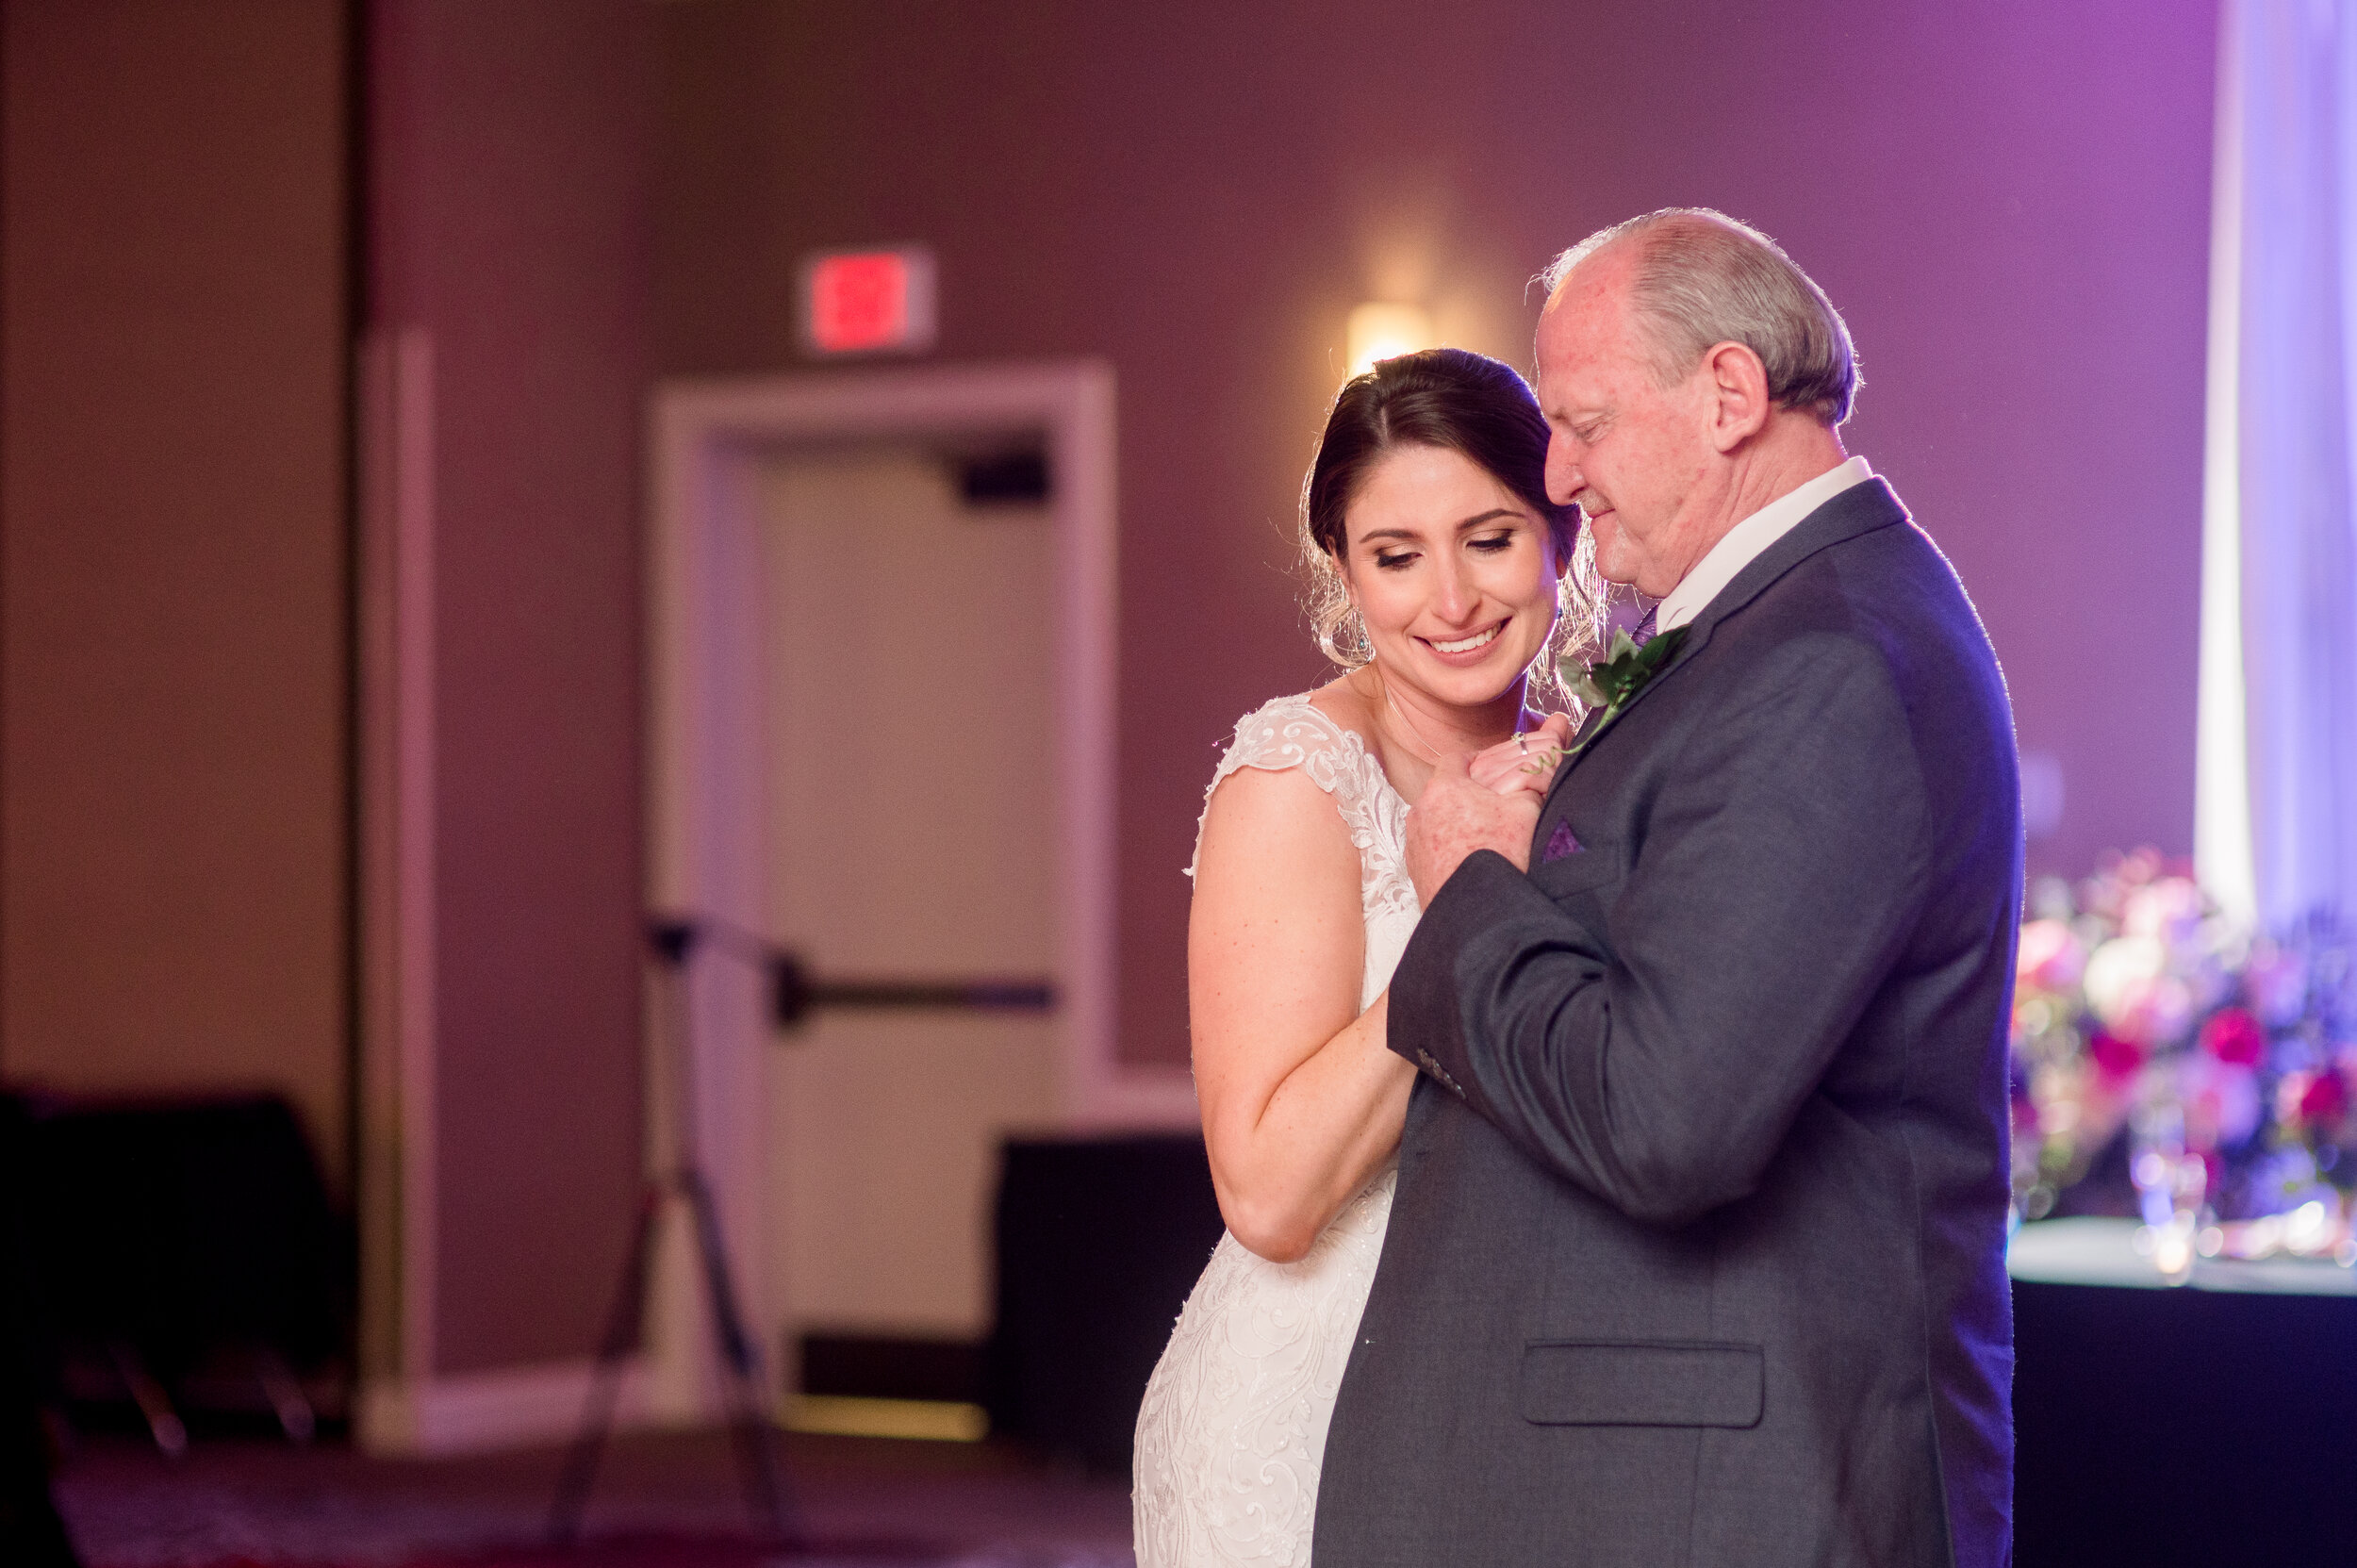 Weddings-at-The-DoubleTree-by-Hilton-Hotel-Pittsburgh-Ashley-Reed-Photography-68.jpg